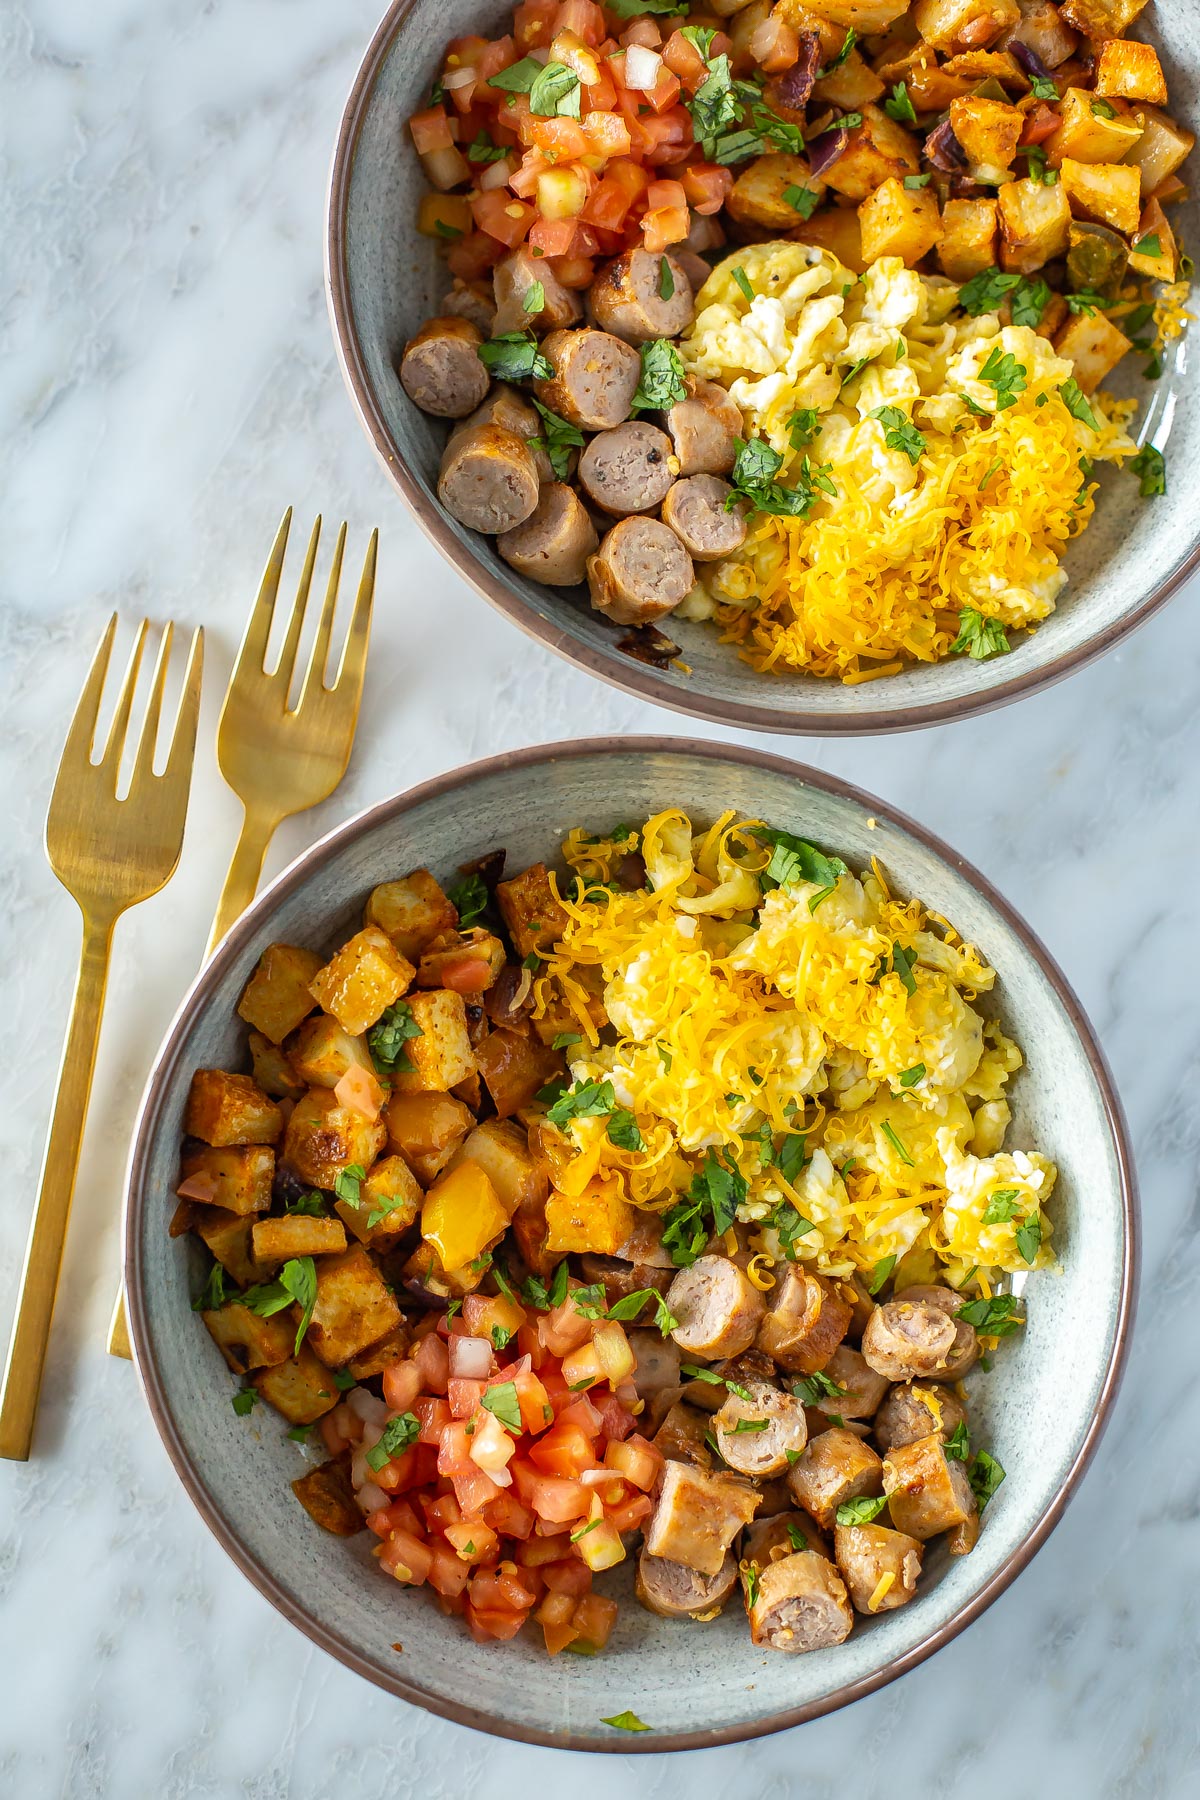 Two breakfast bowls filled with roasted veggies, scrambled eggs and cooked sausage.